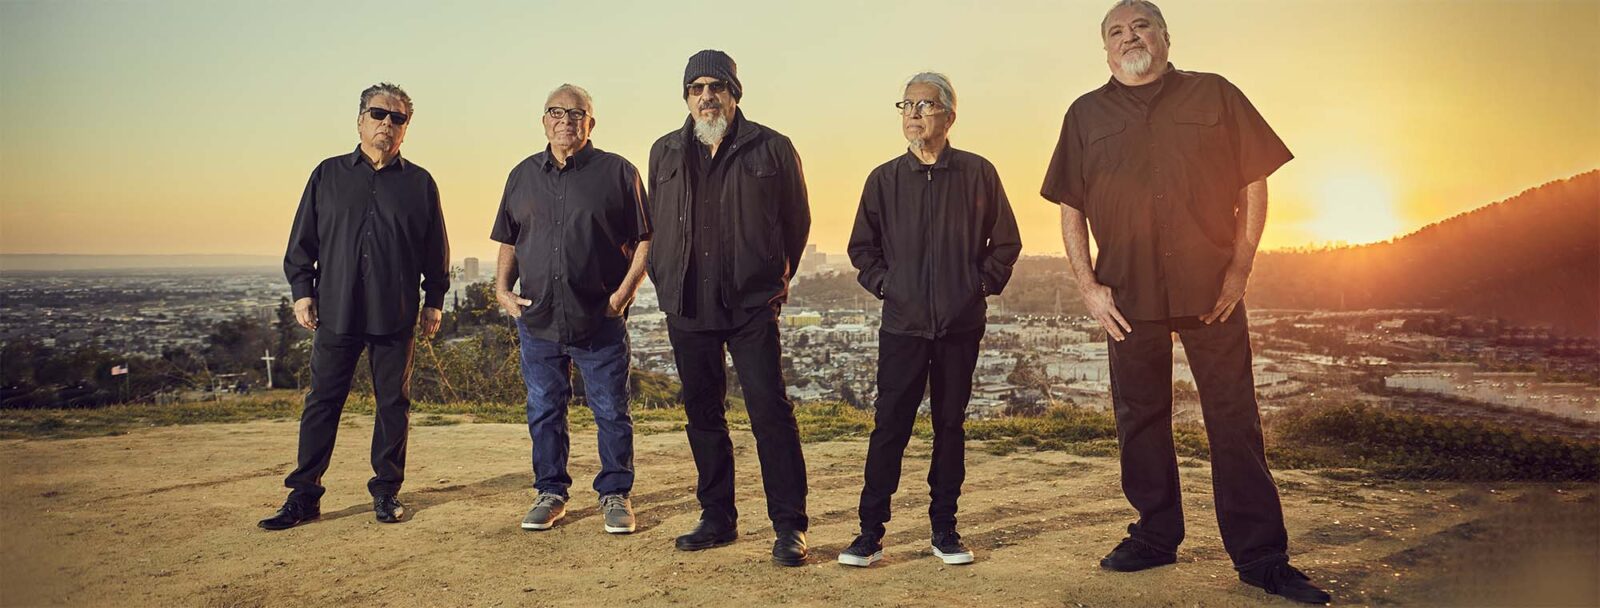 los lobos standing with a sunset view on their backs